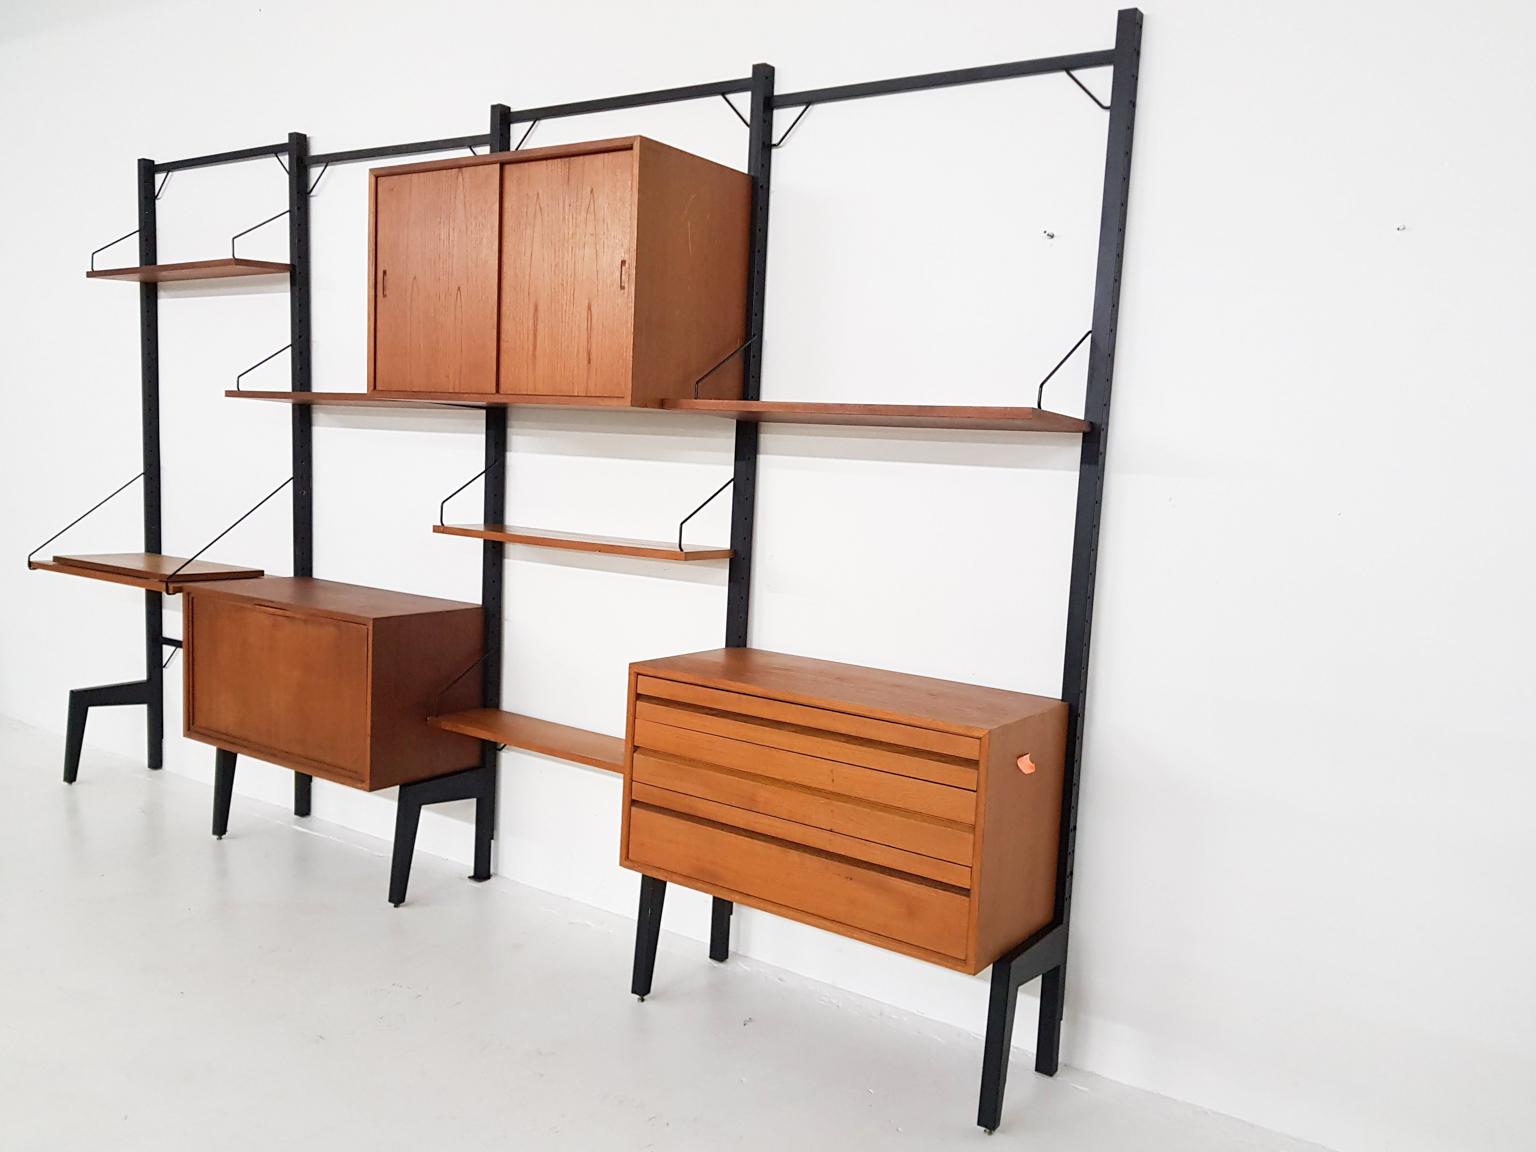 Large free standing wall unit by Poul Cadovius for Royal System in teak. With 5 black metal risers.
Measures: 1 x TV shelf 40 x 80 cm (D x W)
1 x cabinet with sliding doors 52 x 40 x 80 cm (H x D x W)
1 x cabinet with valve 42.5 x 37.5 x 80 cm (H x